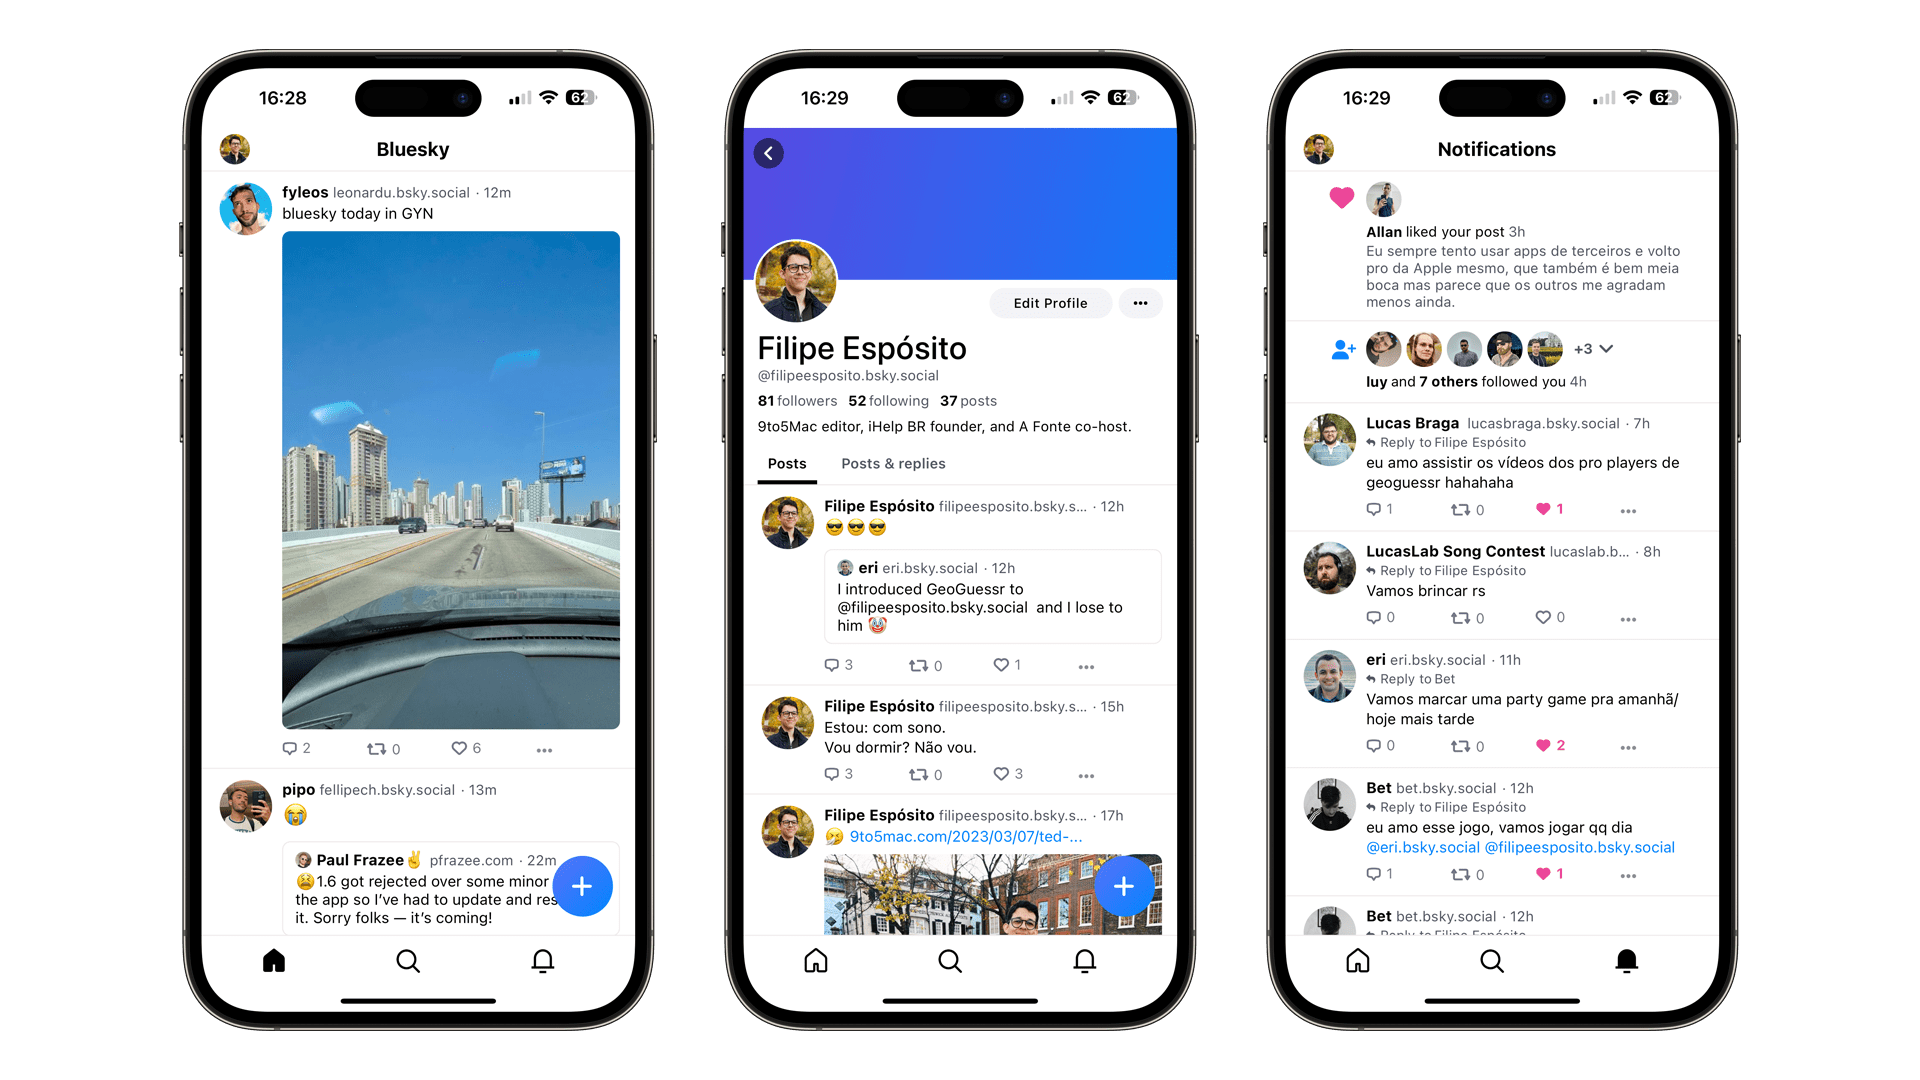 Here's a first look at Bluesky, the new social network from Twitter's co-founder